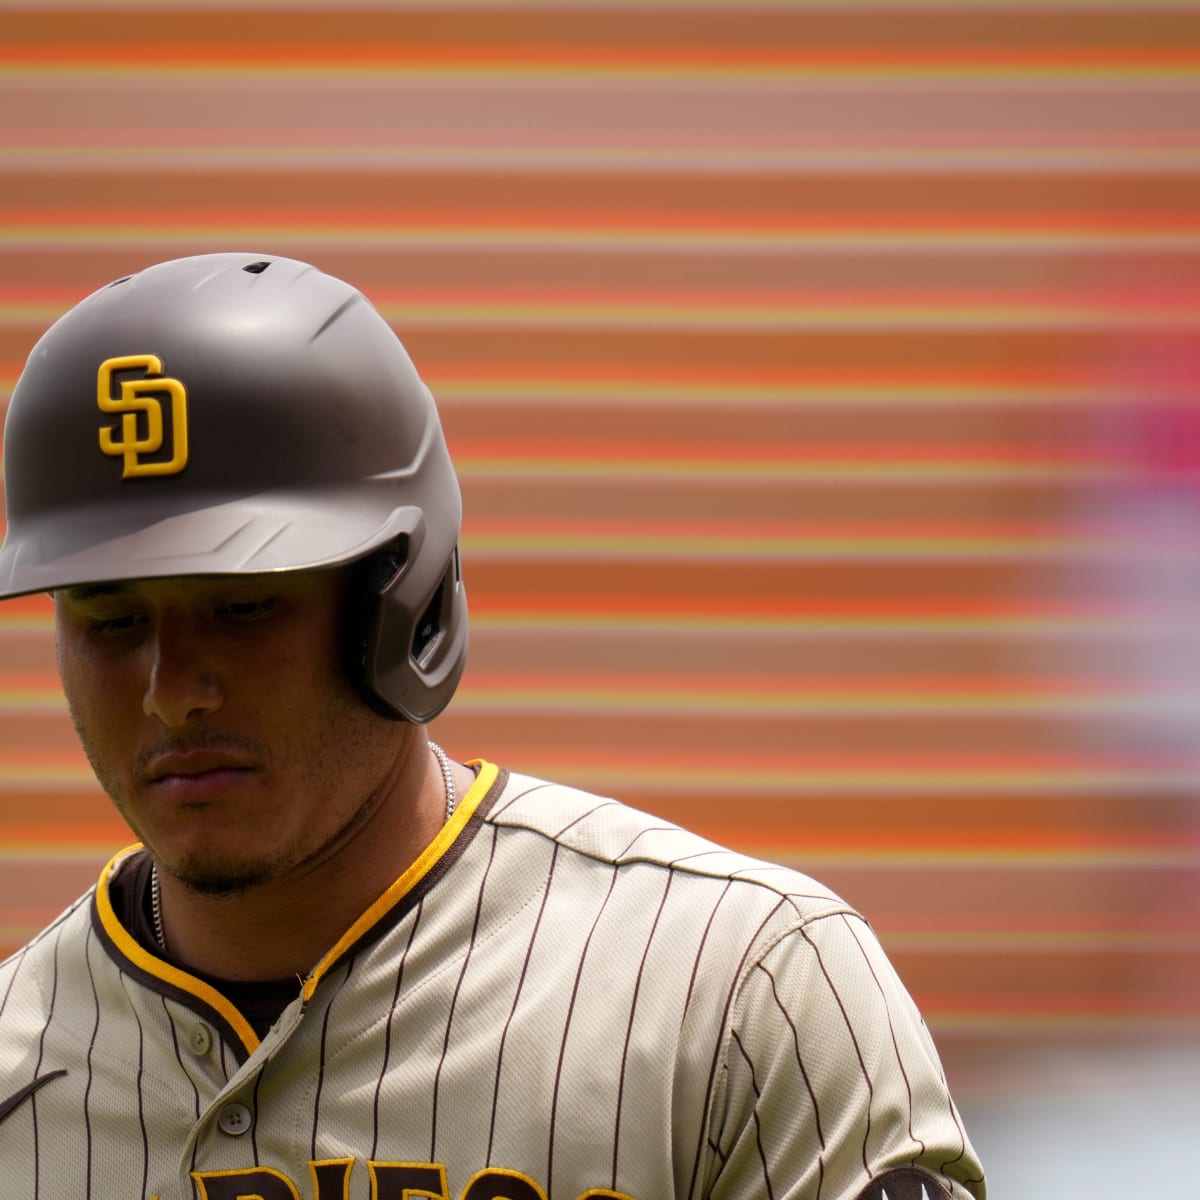 The Padres Are Bringing Back the Best Ugly Uniforms, Making